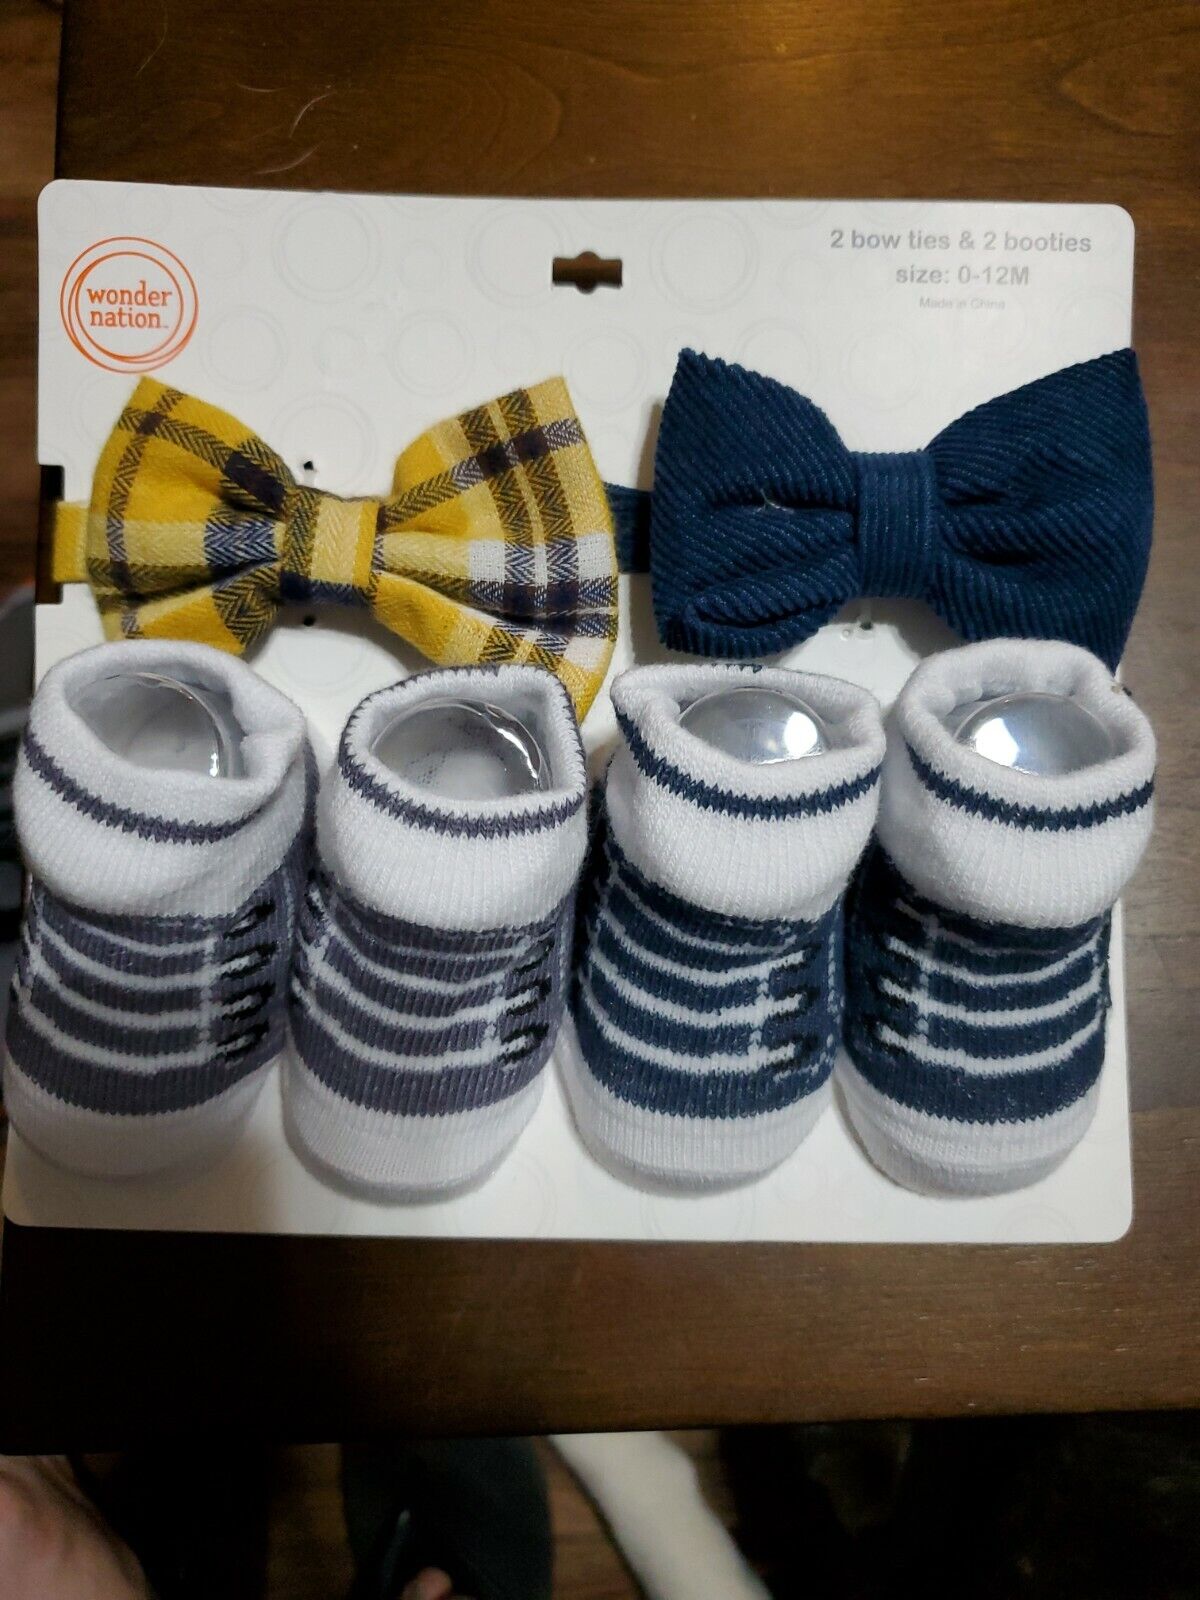 Wonder Nation 2 Bow Ties And 2 Booties 0-12m